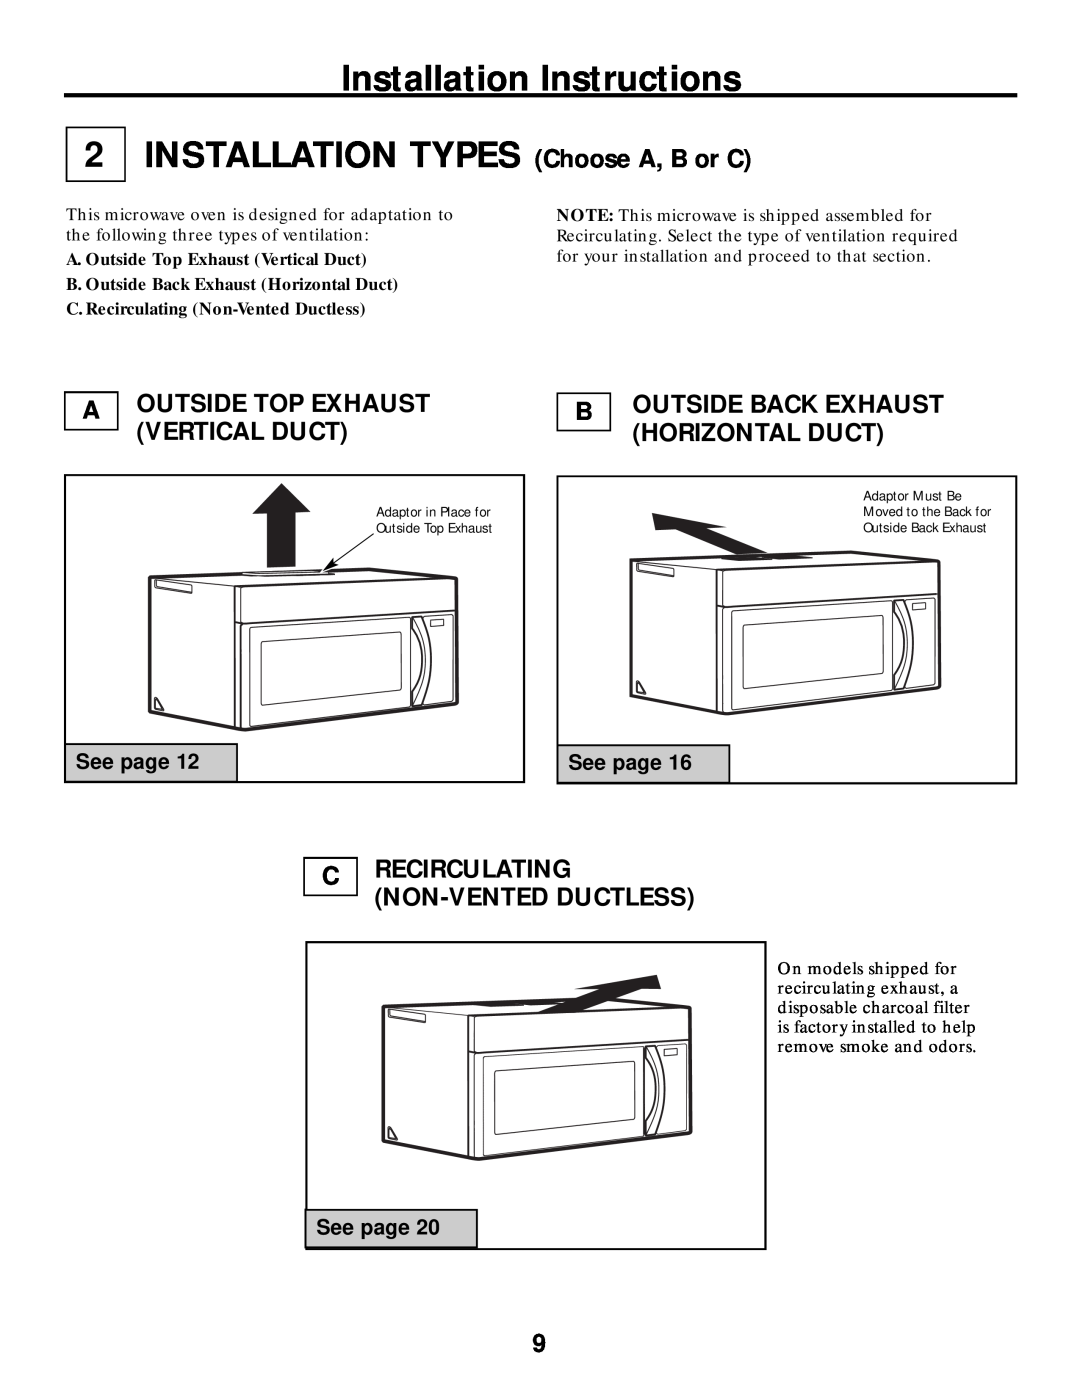 Frigidaire 316495063 warranty INSTALLATION TYPES Choose A, B or C, A Outside Top Exhaust Vertical Duct, See page 